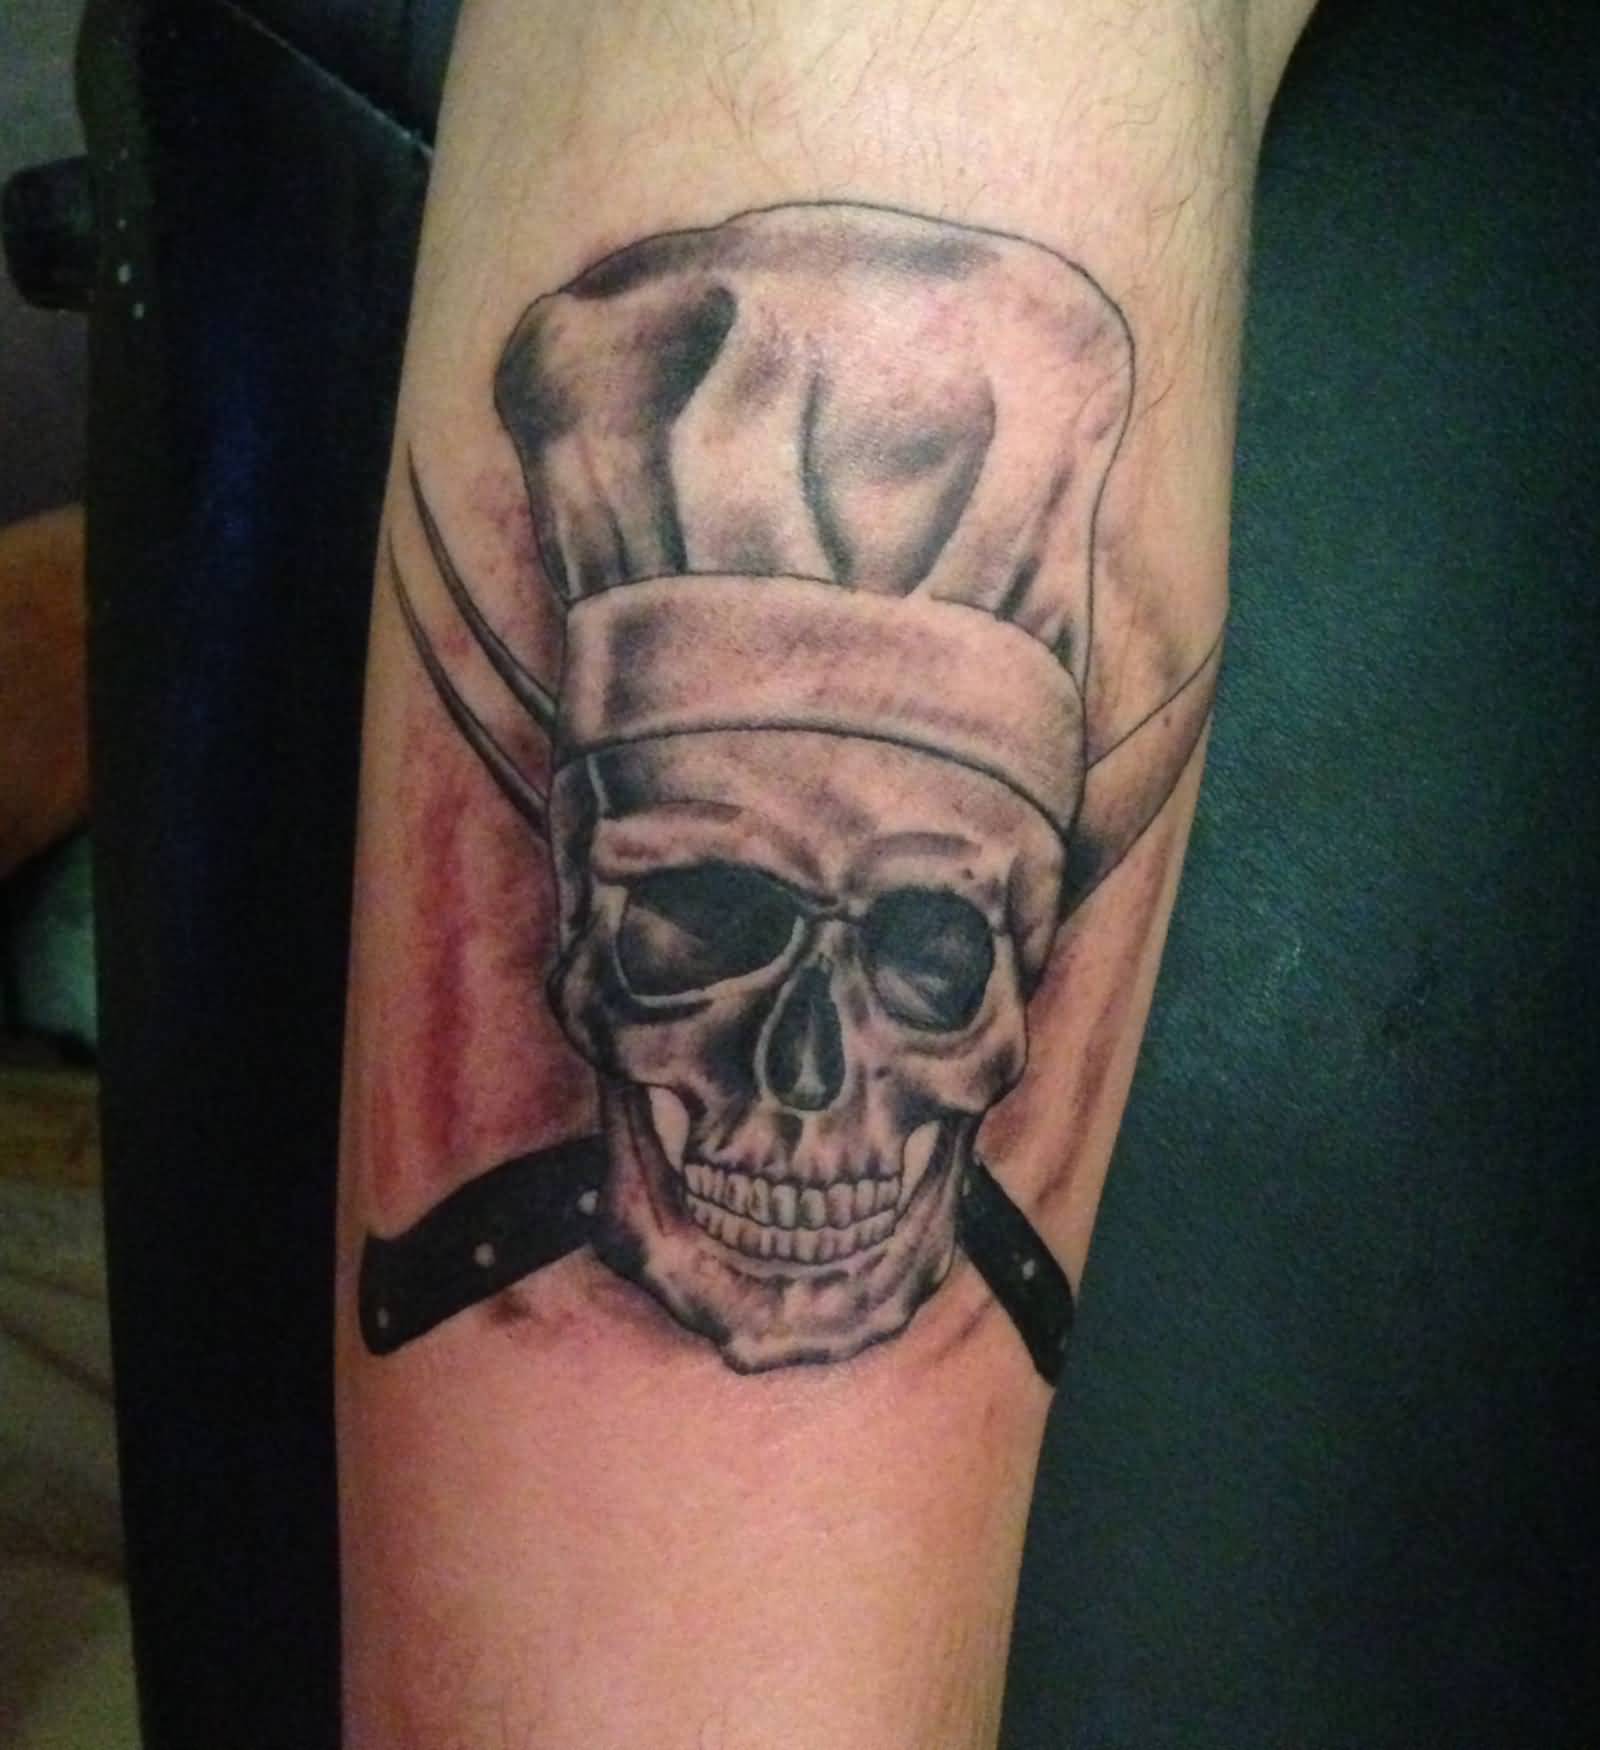 Chef Skull With Crossed Knives Tattoo On Forearm